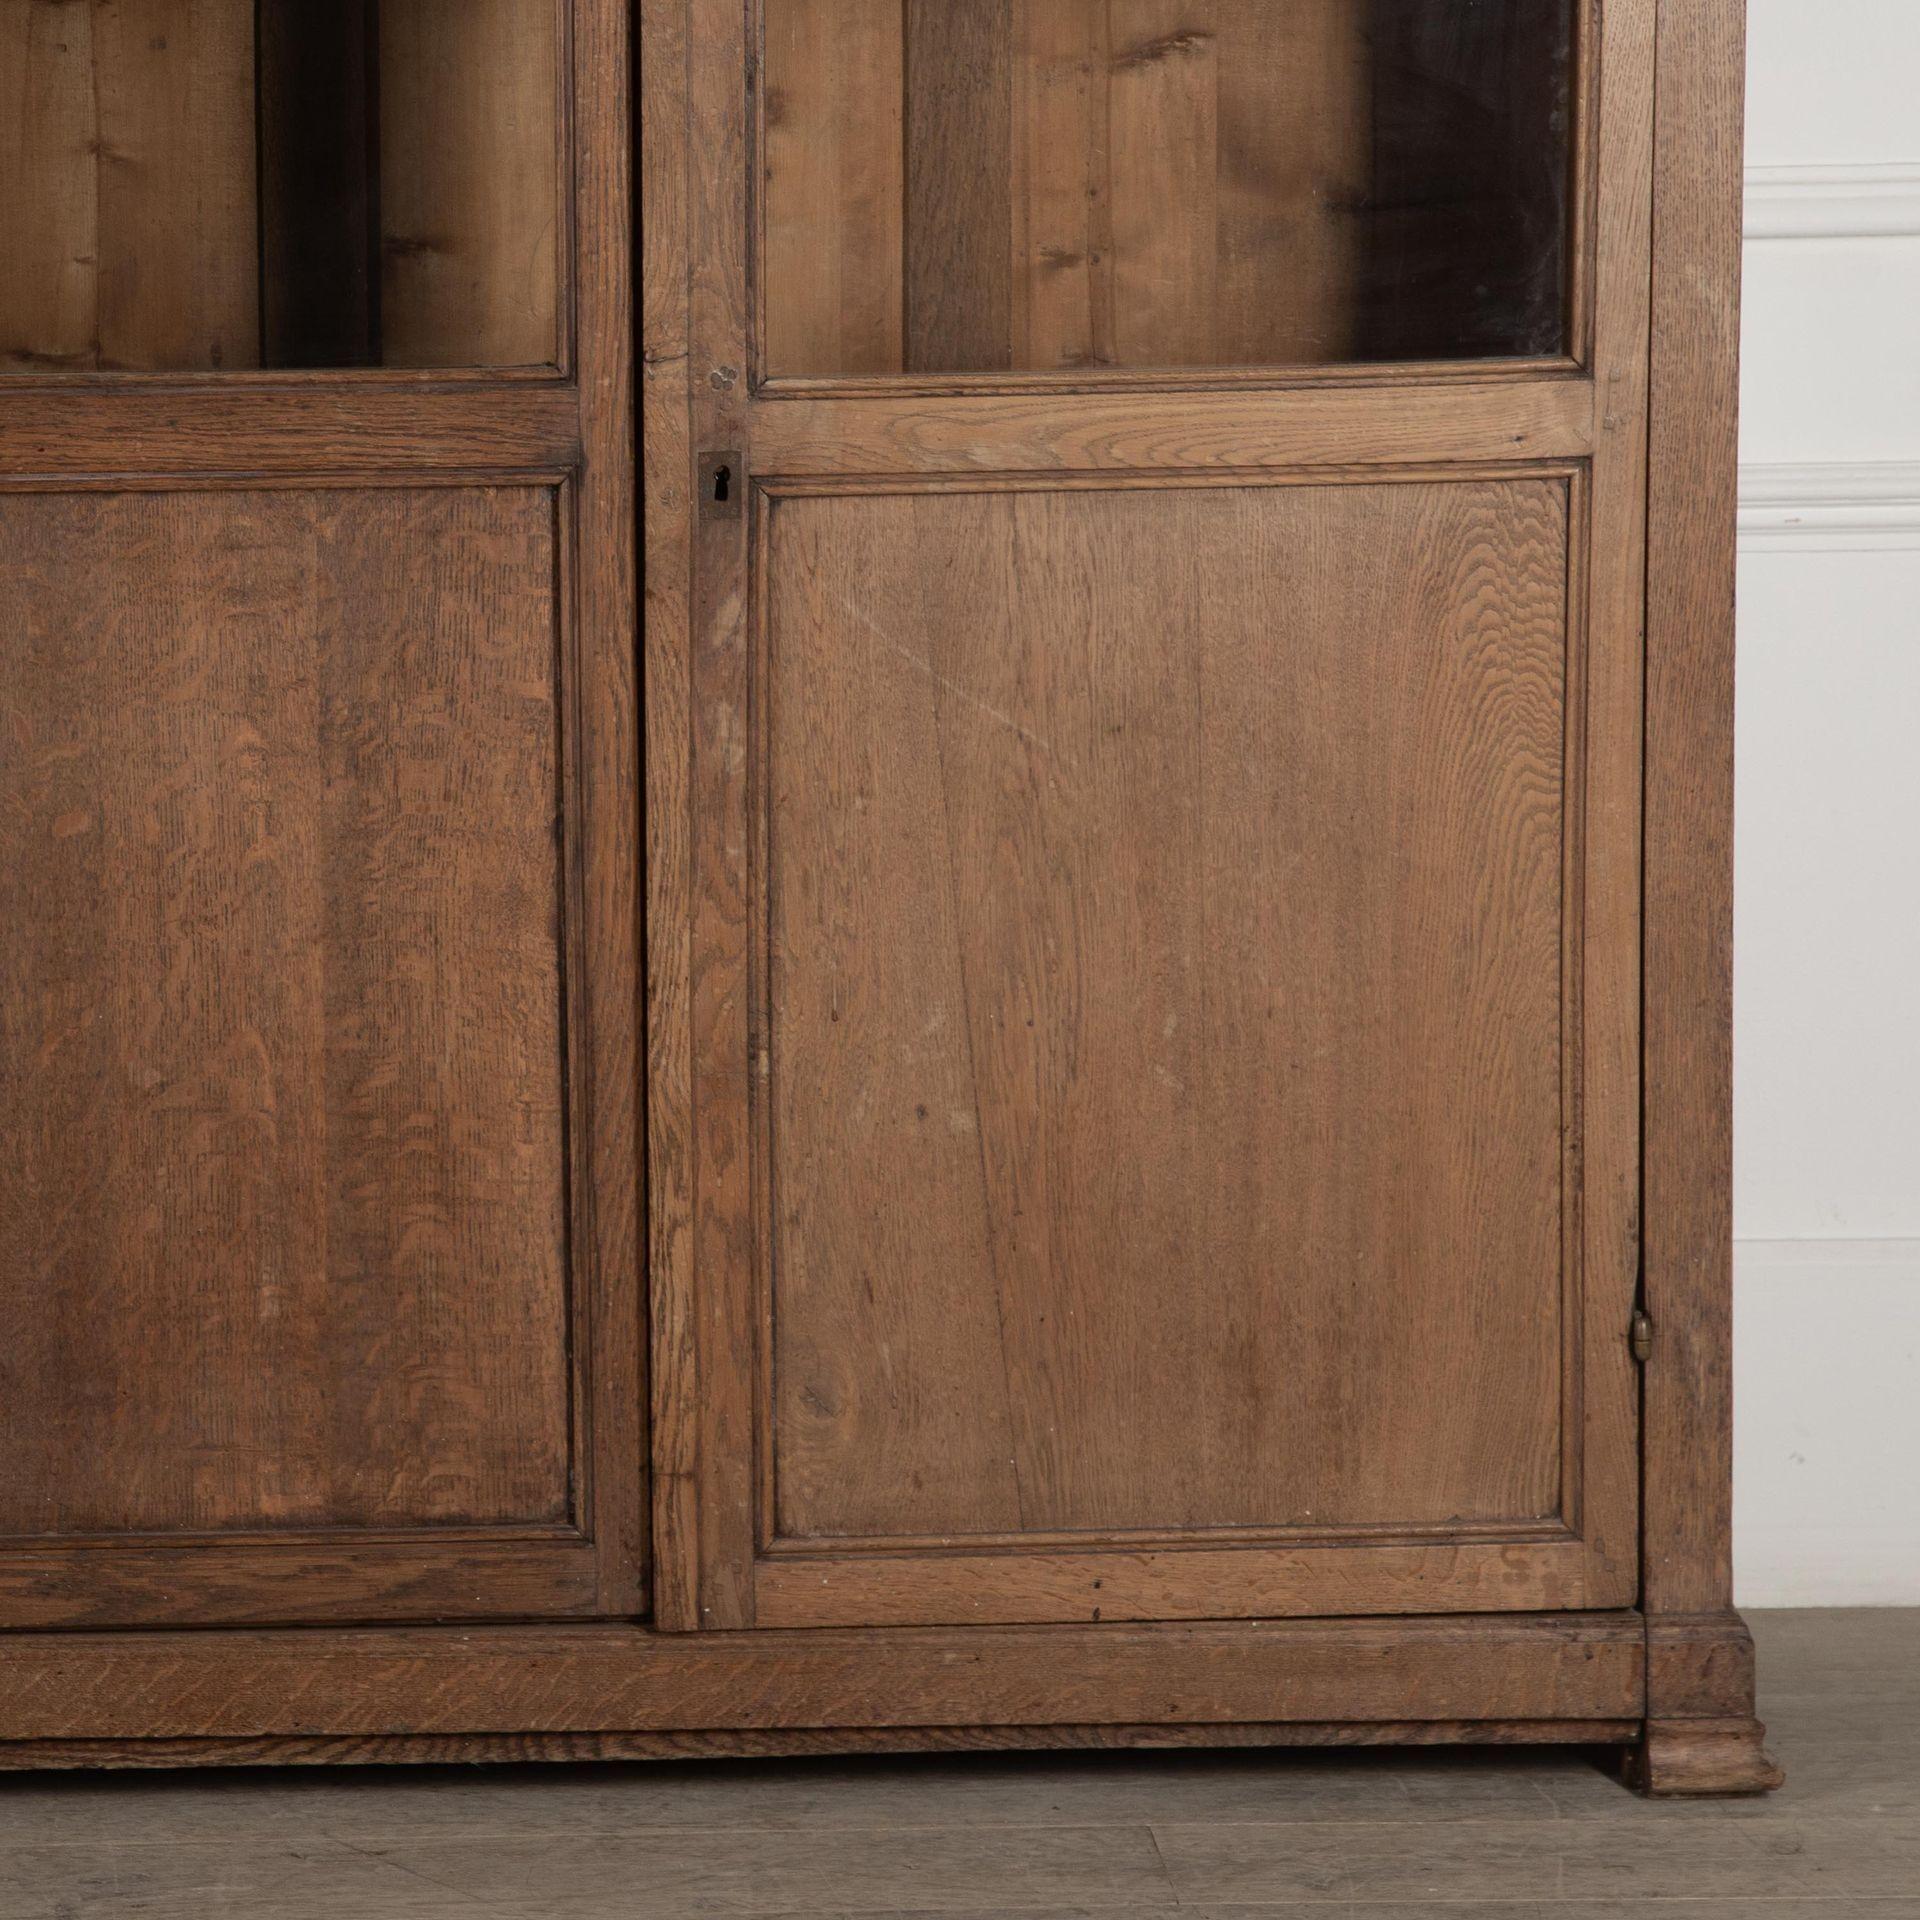 Pair of 19th Century tall oak bookcases, the interior has adjustable shelves enclosed by glazed and panelled doors.

The moulded cornice above twin-part glazed doors encloses an interior with adjustable shelves, having panelled sides and supported